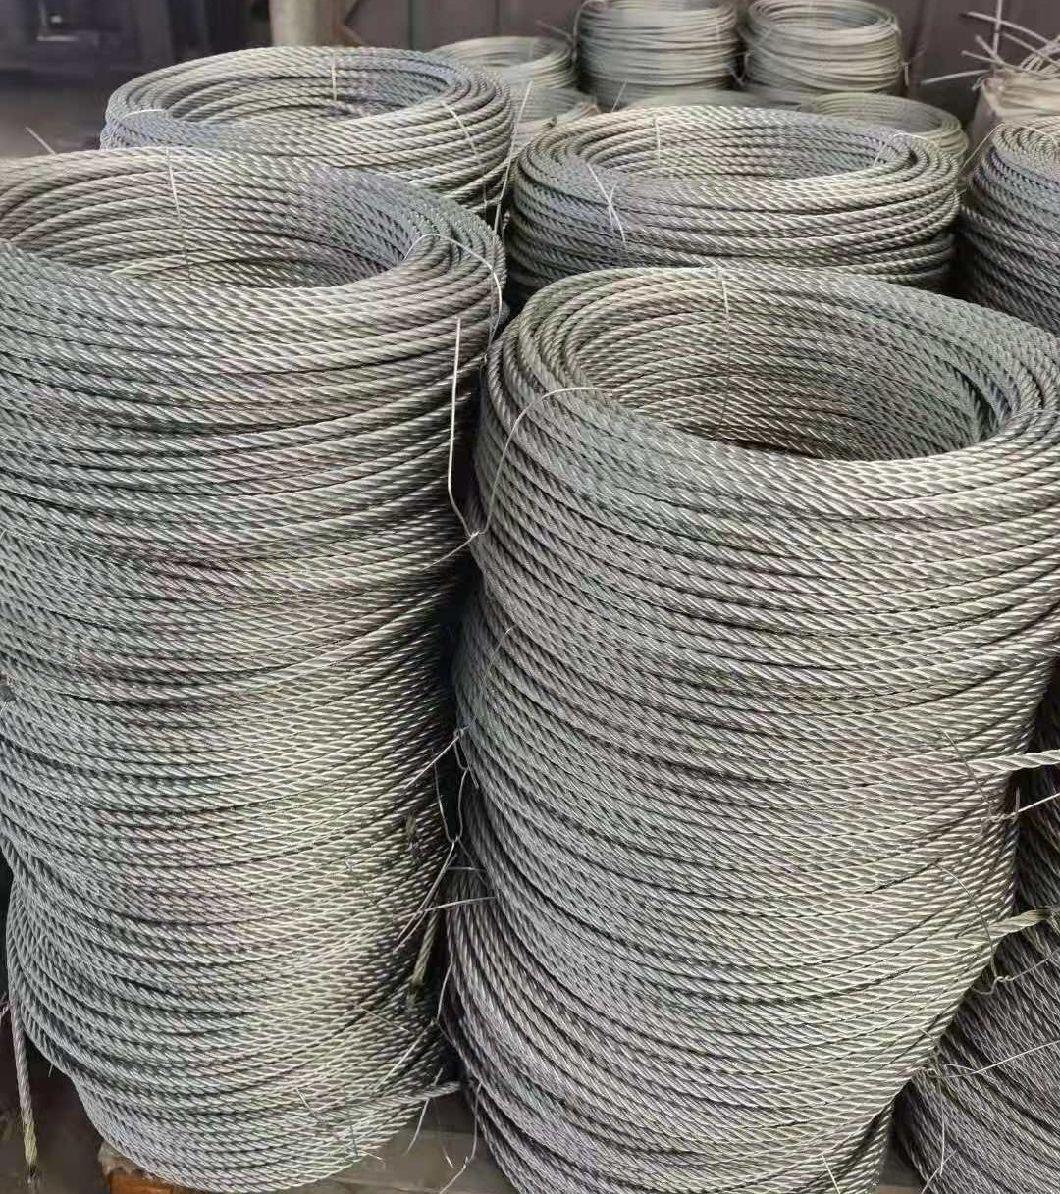 China Steel Wire Rope 8-12mm Manufacturers for Elevators Price